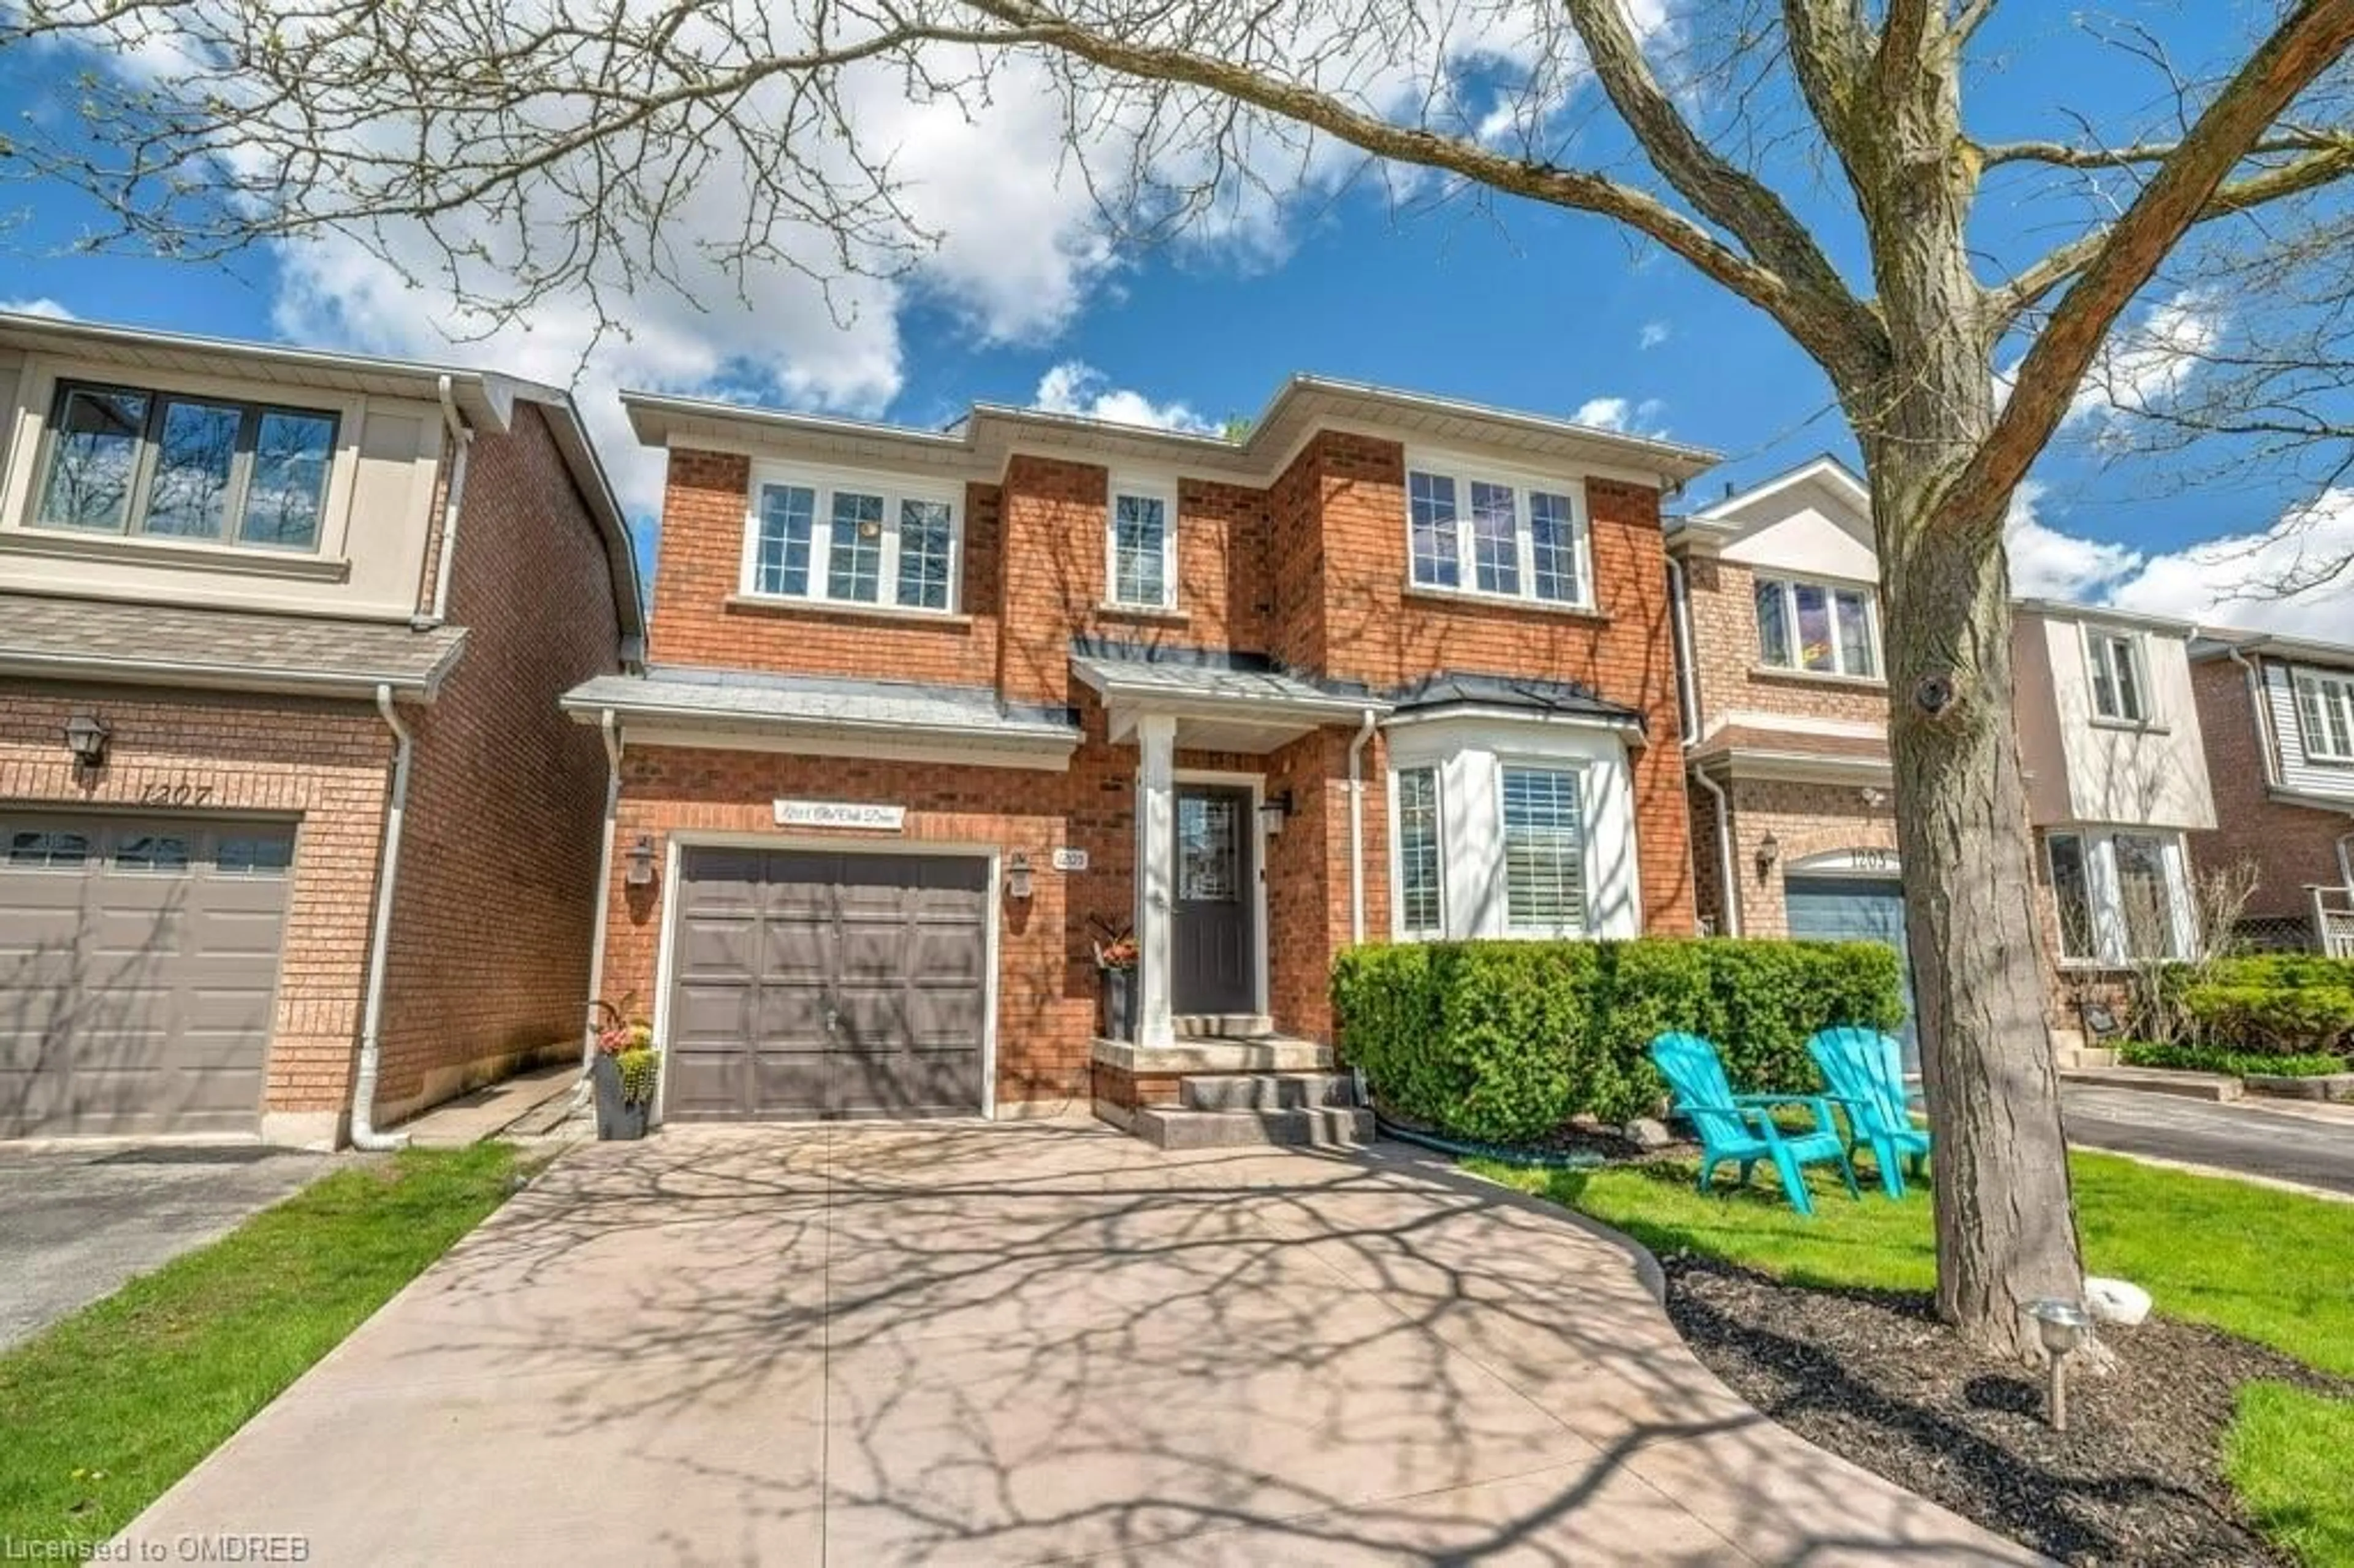 Home with brick exterior material for 1205 Old Oak Dr, Oakville Ontario L6M 3K6